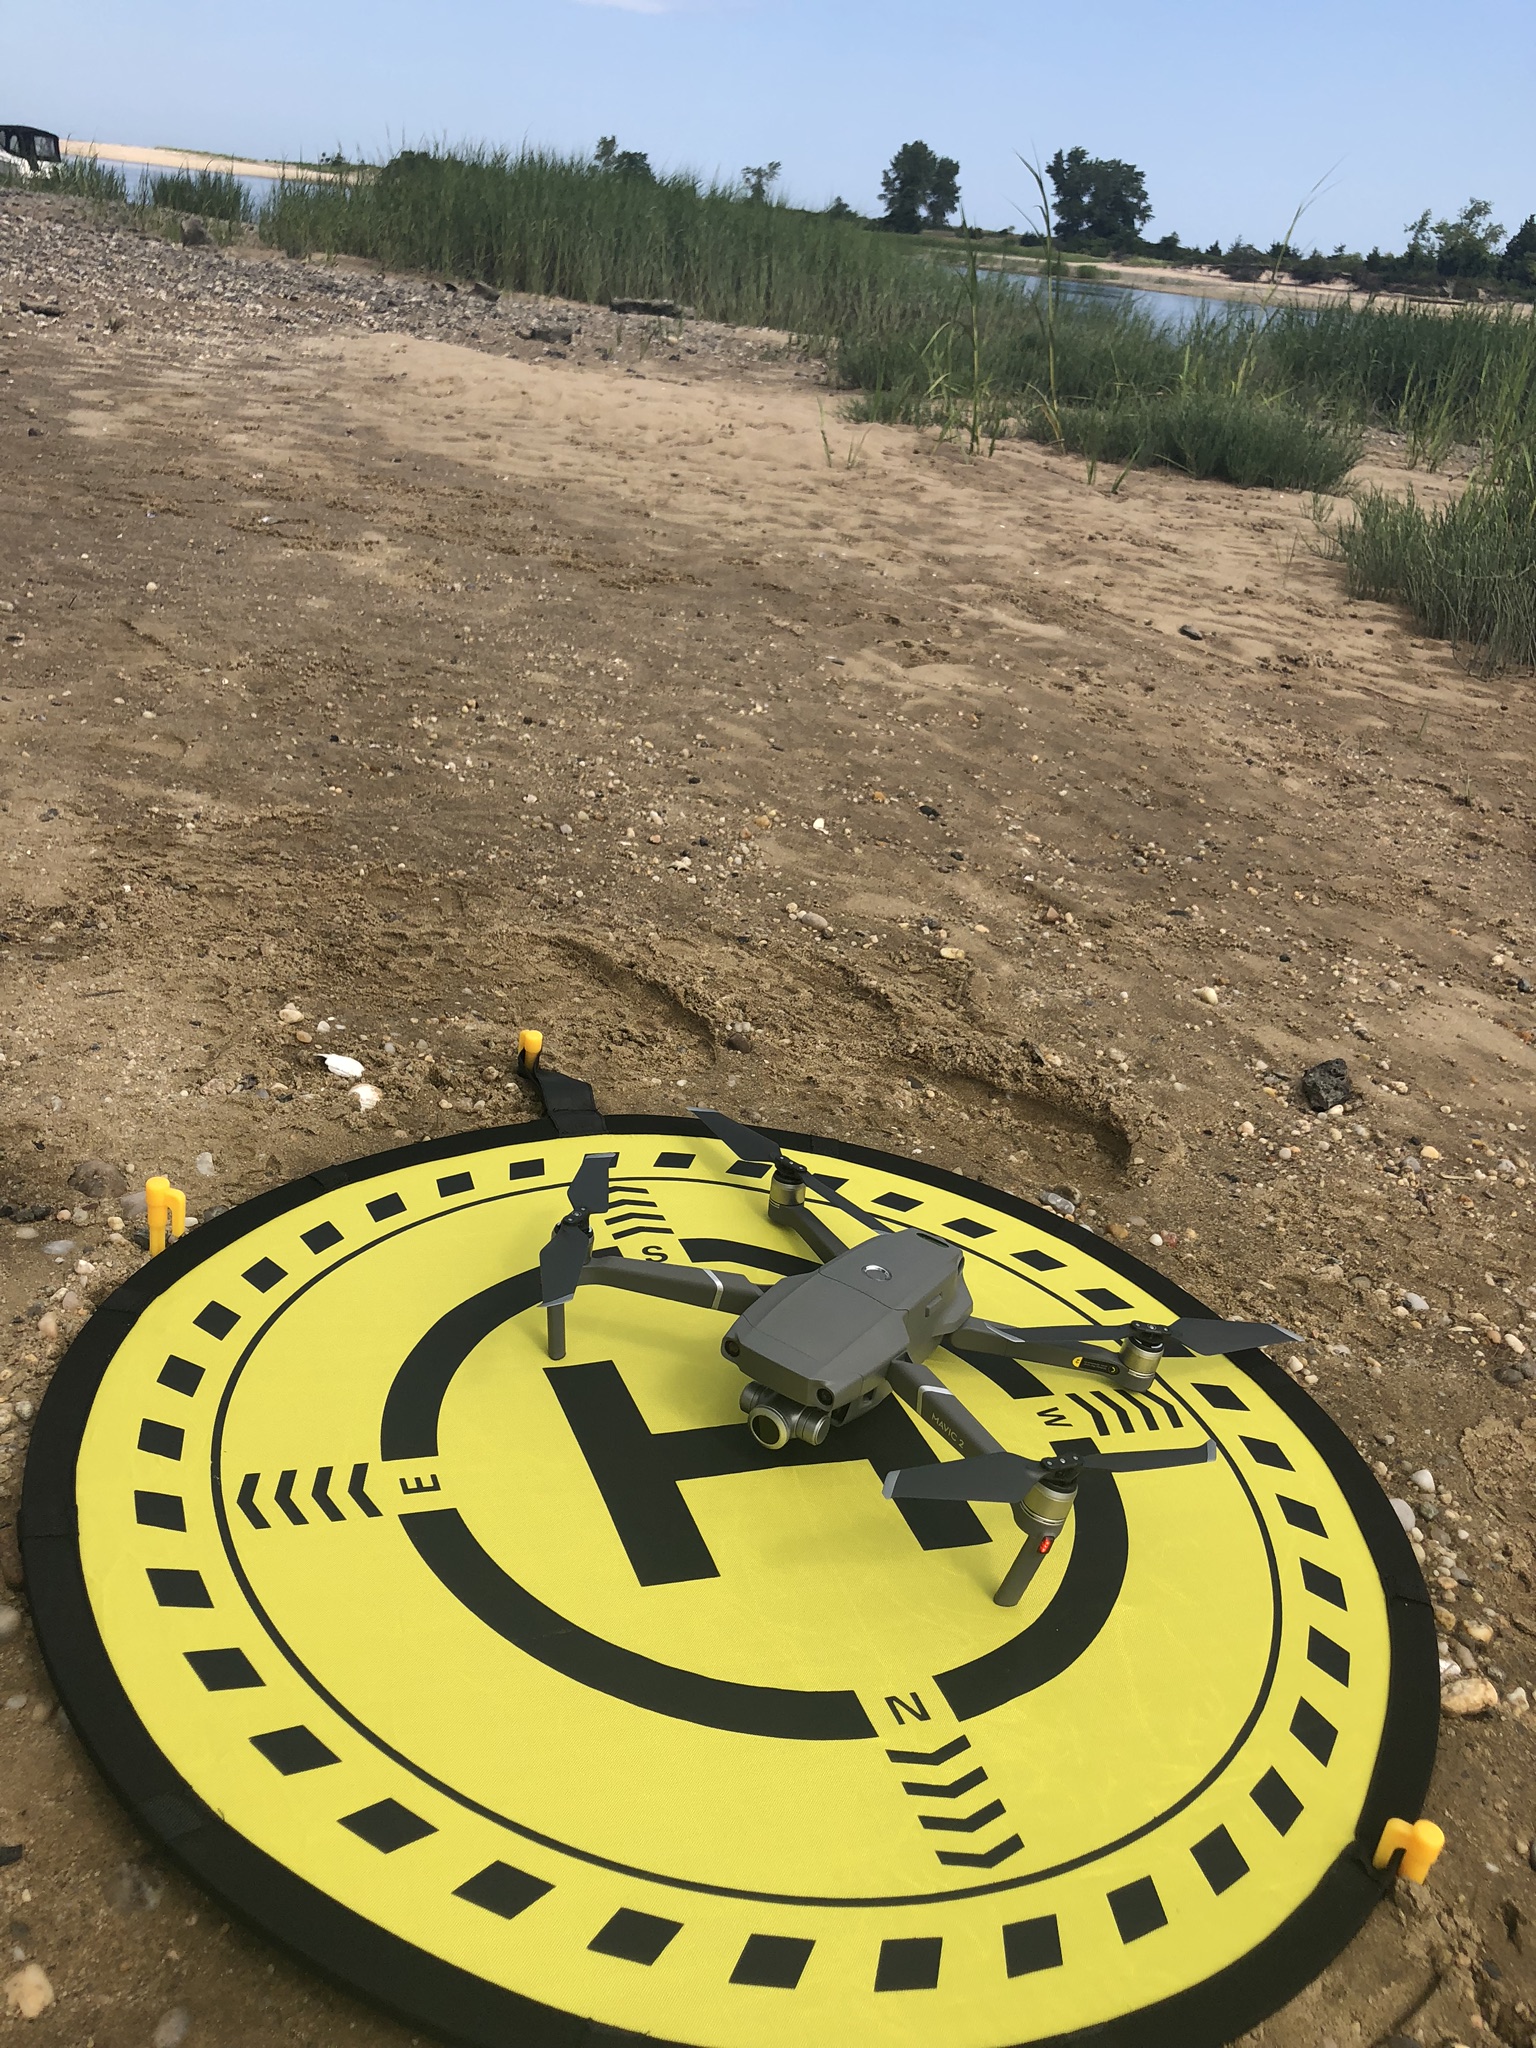 2019 Top Fishing Spots Mavic 2 Zoom Drone is the ideal tool to use to find Great Fishing Spot.